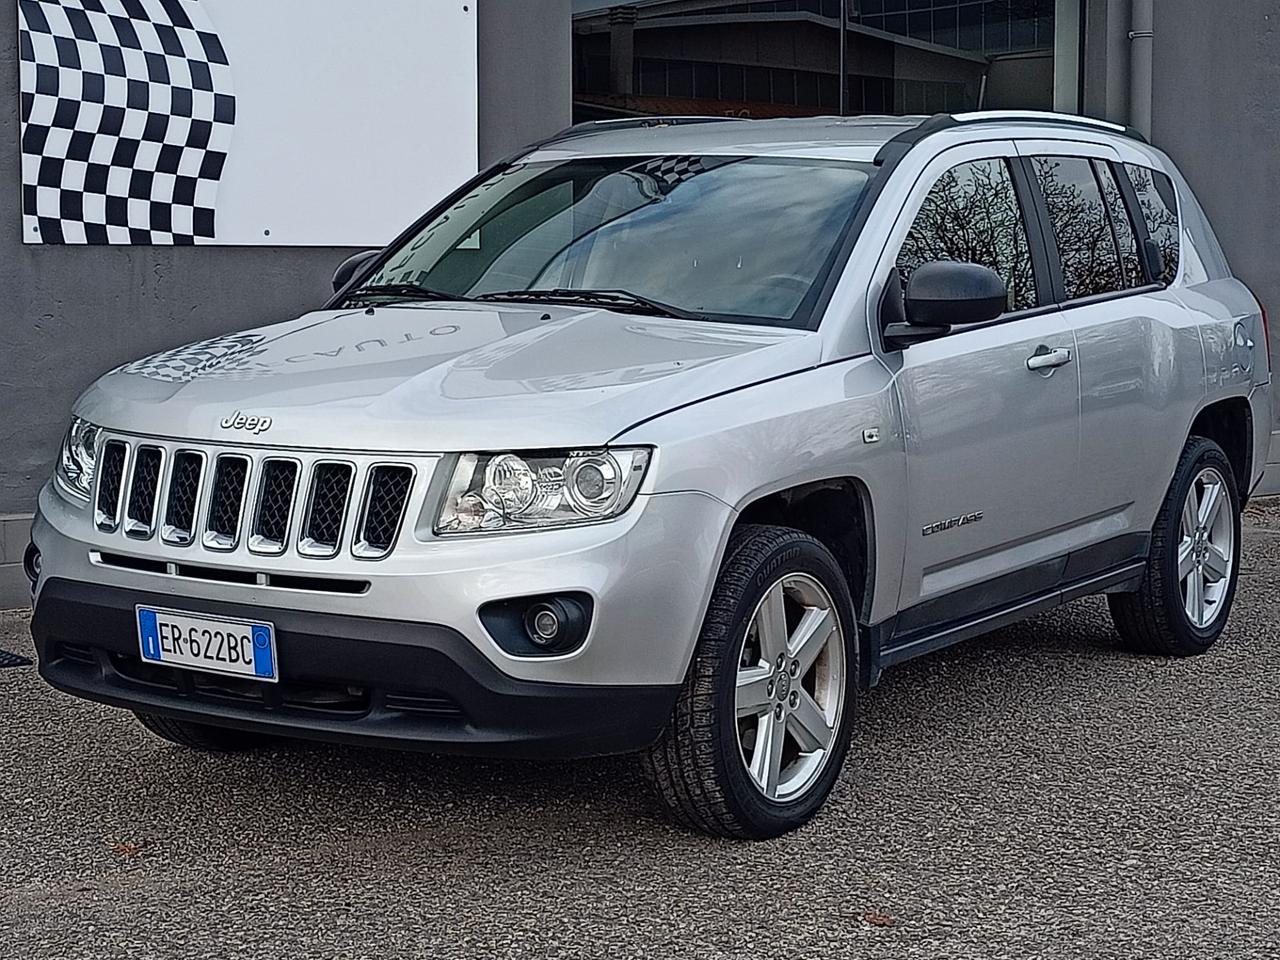 Jeep Compass 2.2 CRD Limited 4x4